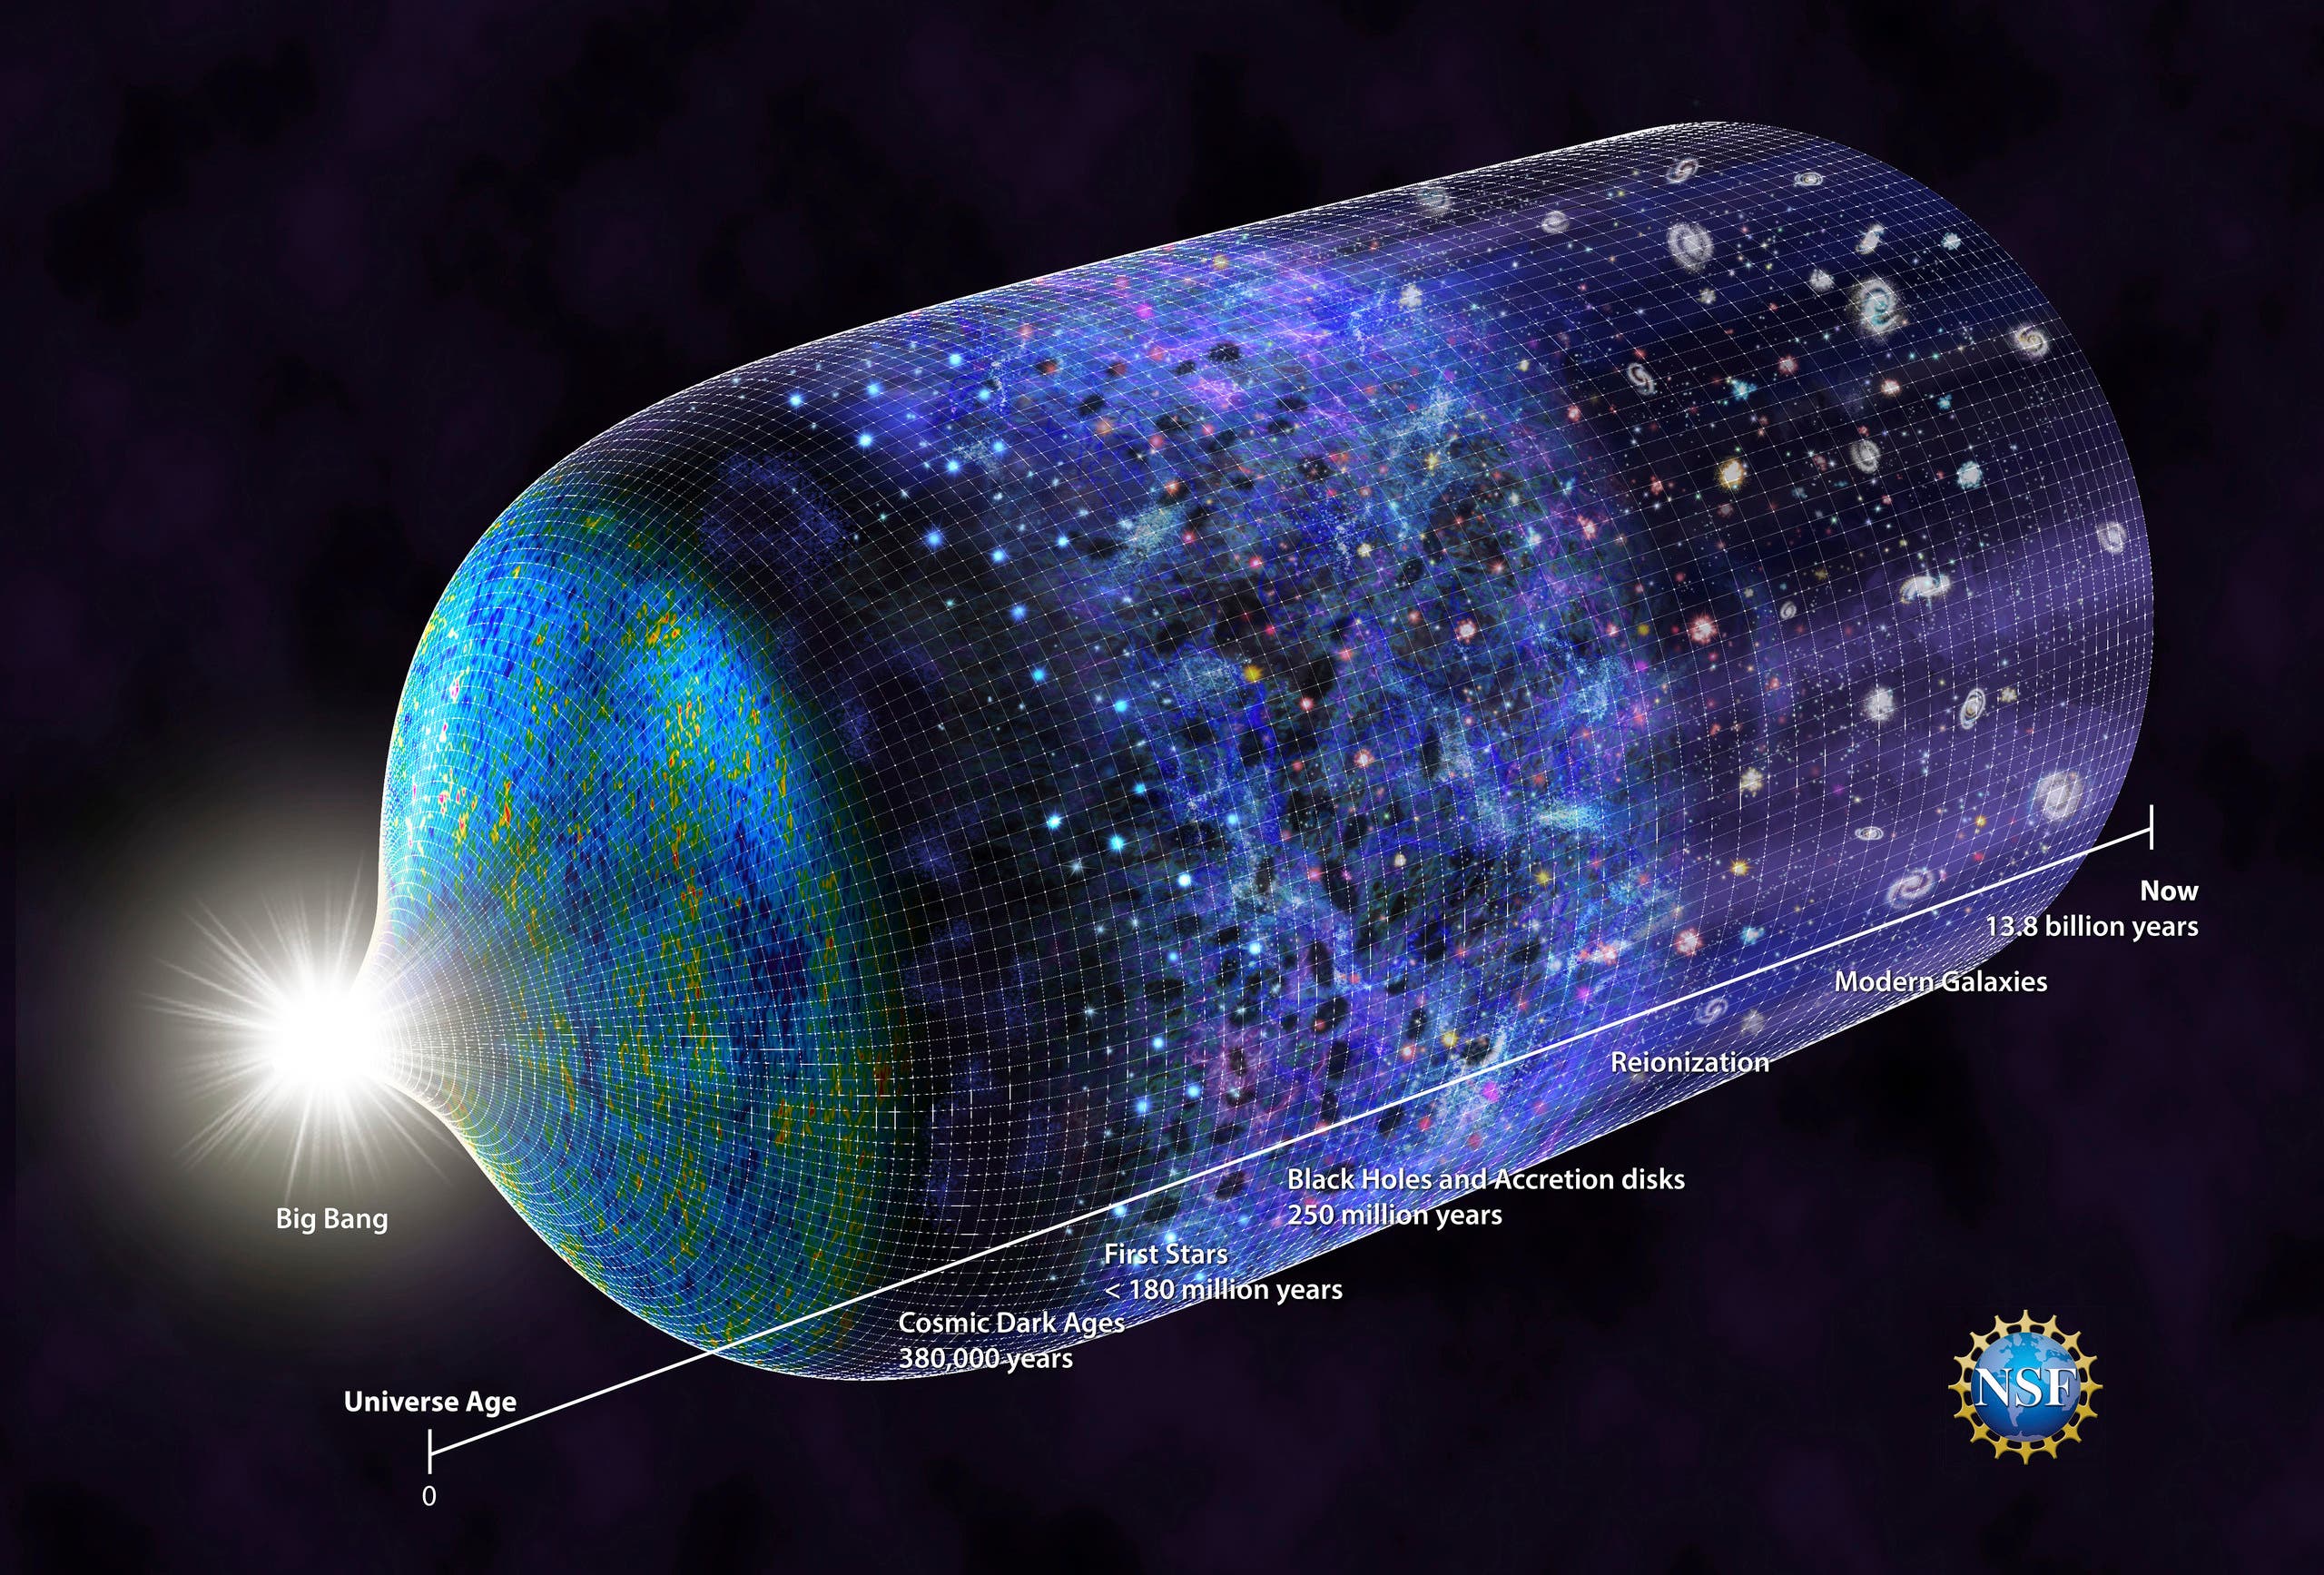 This image provided by the National Science Foundation shows a timeline of the universe. (AP)